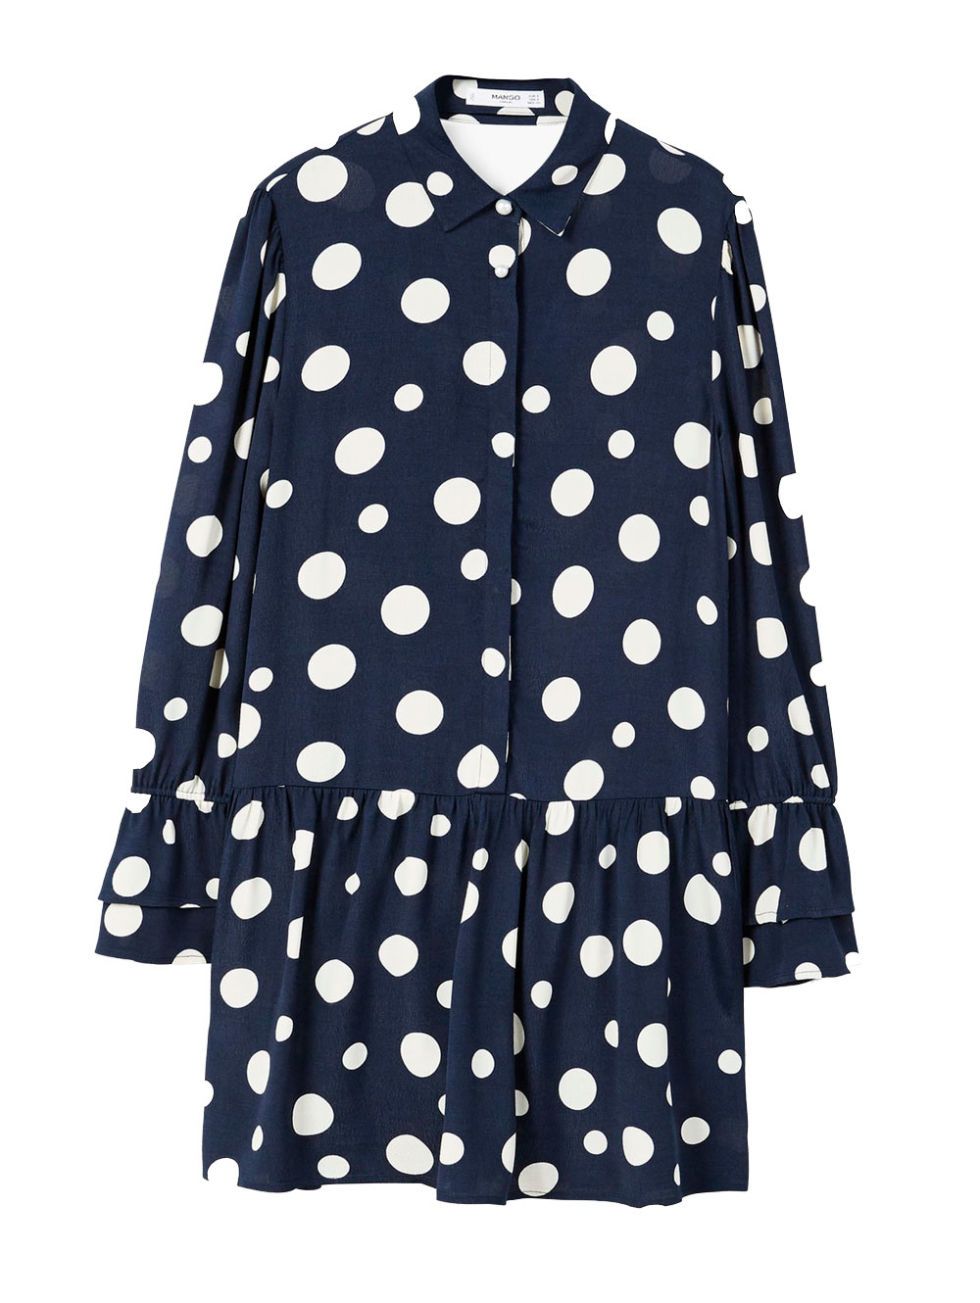 Clothing, Pattern, Polka dot, Sleeve, Design, Outerwear, Music, Dance, Performing arts, Day dress, 